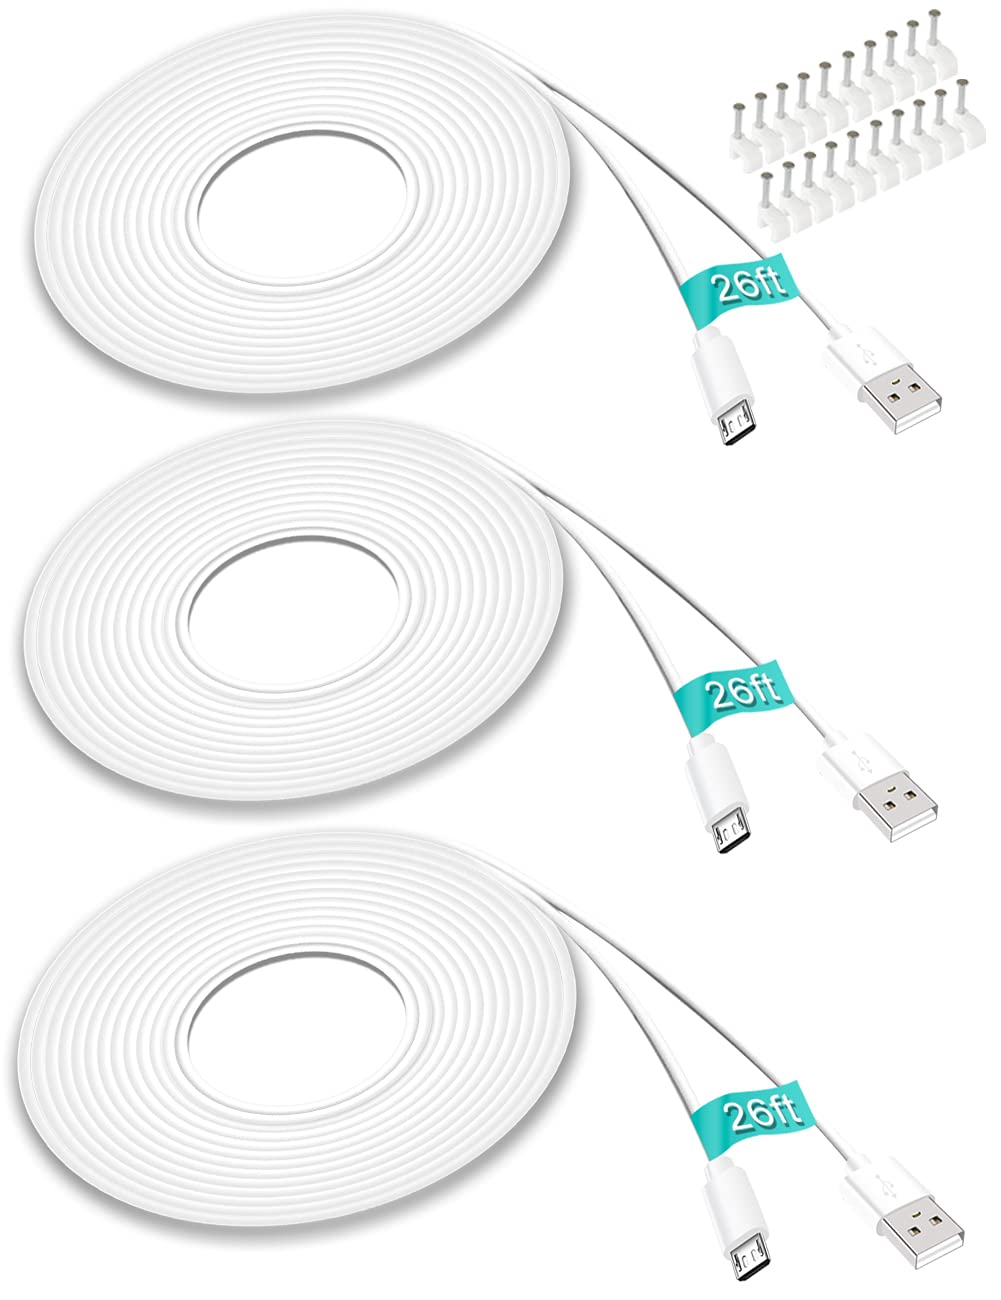  [AUSTRALIA] - SIOCEN 3 Pack 26FT Micro USB Cable Power Extension Cord for Wyze Cam,WyzeCam Pan,YI Cam,YI Dome Home Camera,Kasa Cam,Oculus Go,Furbo Dog,Nest Cam,Blink,Long Charging Wire for Security Cameras